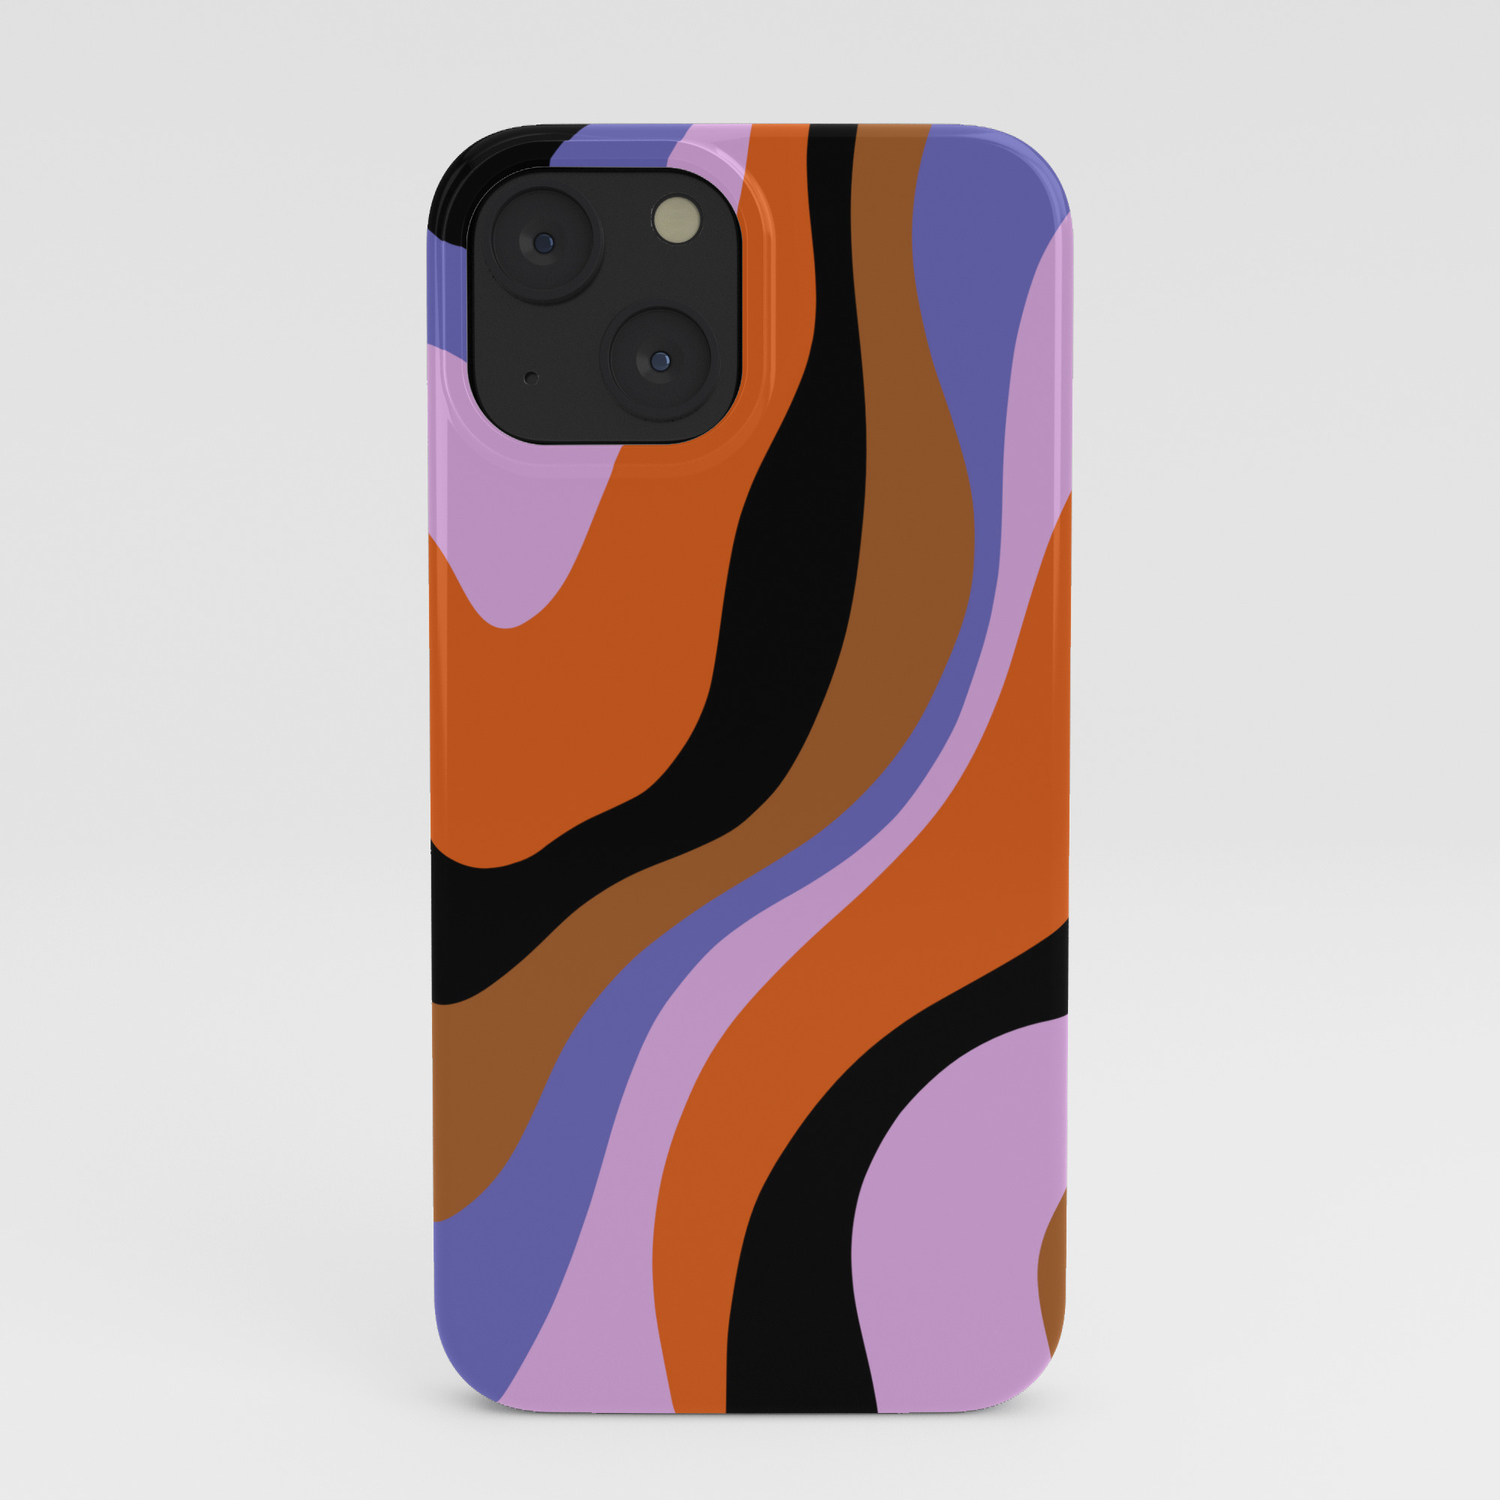 Vleien moe Symposium Abstract six iPhone Case by Milly Amalia | Society6